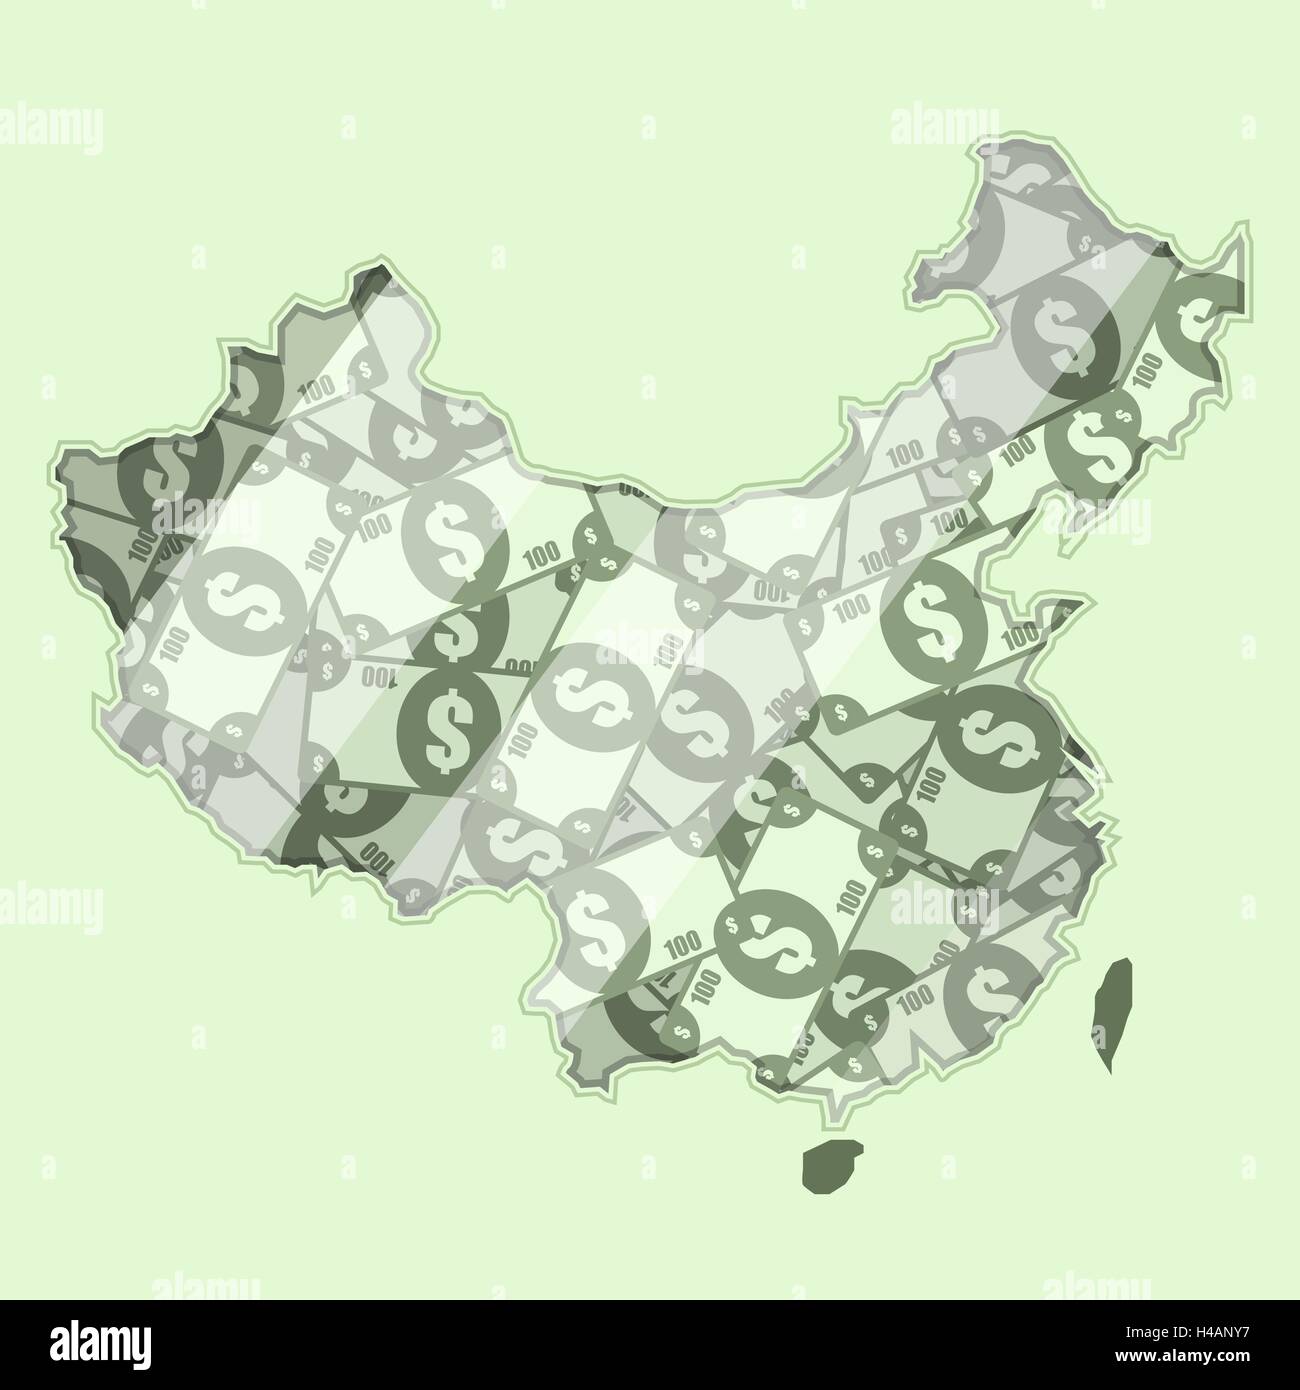 Map China covered in money, bank notes of one hundred dollars. On the map there is glass reflection. Conceptual. Stock Vector